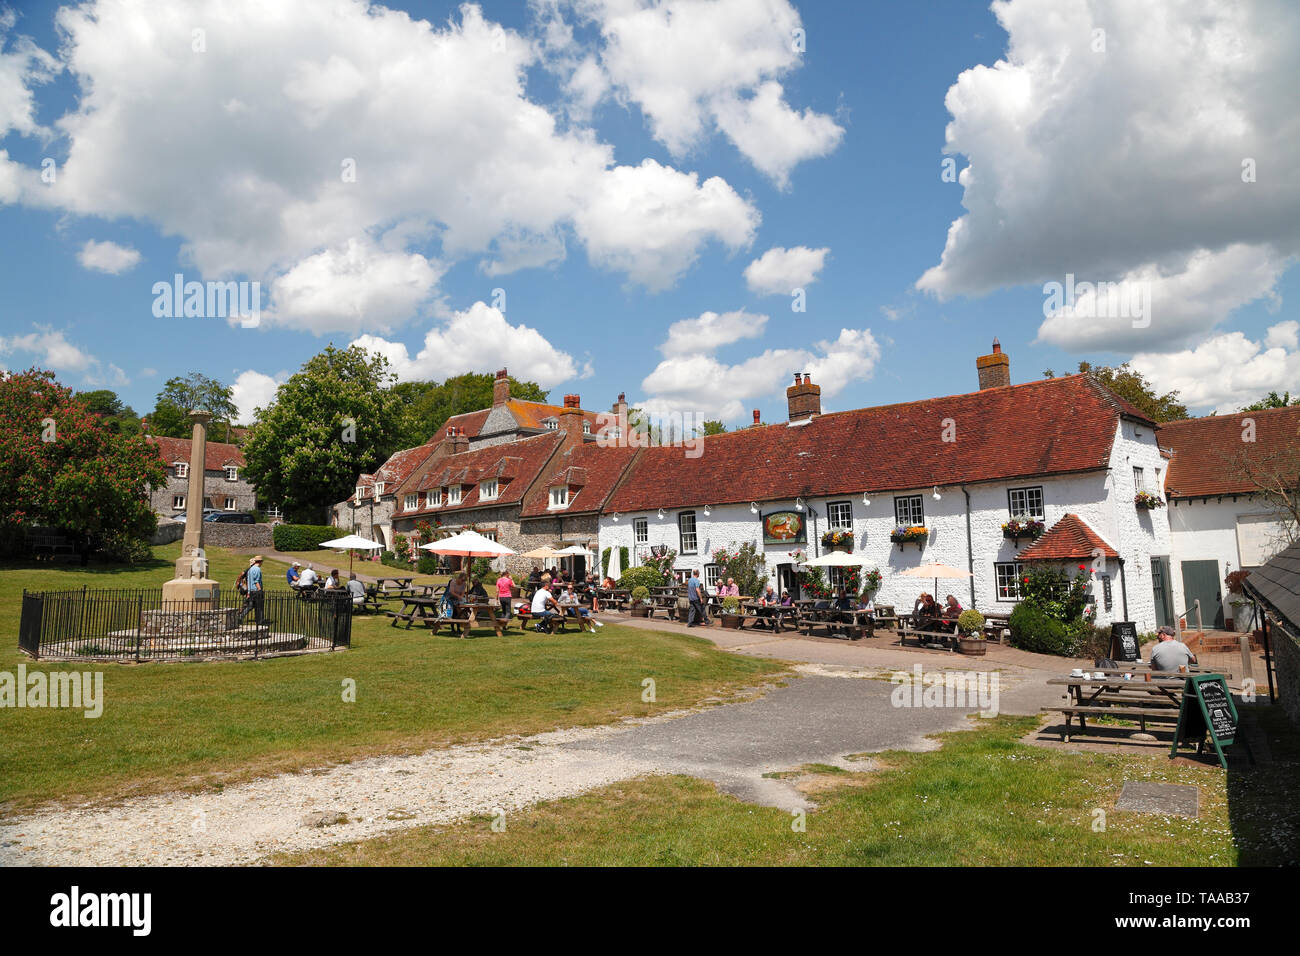 The picturesque Tiger Inn at East Dean, East Sussex; popular with walkers and hikers on the South Downs, UK Stock Photo